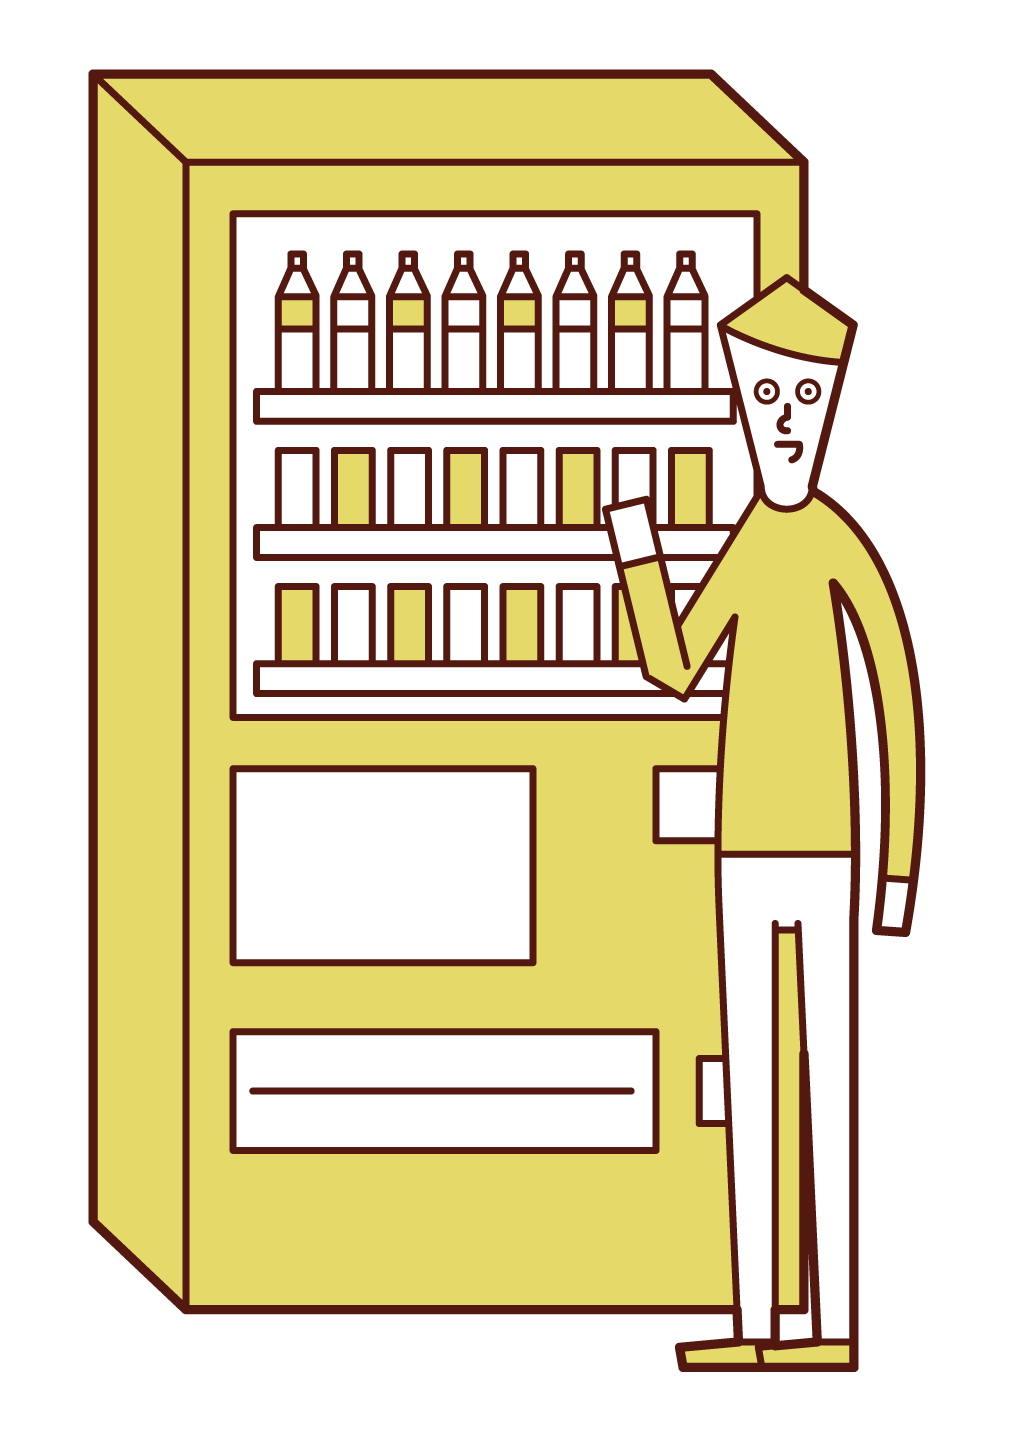 Illustration of a man buying a drink from a vending machine